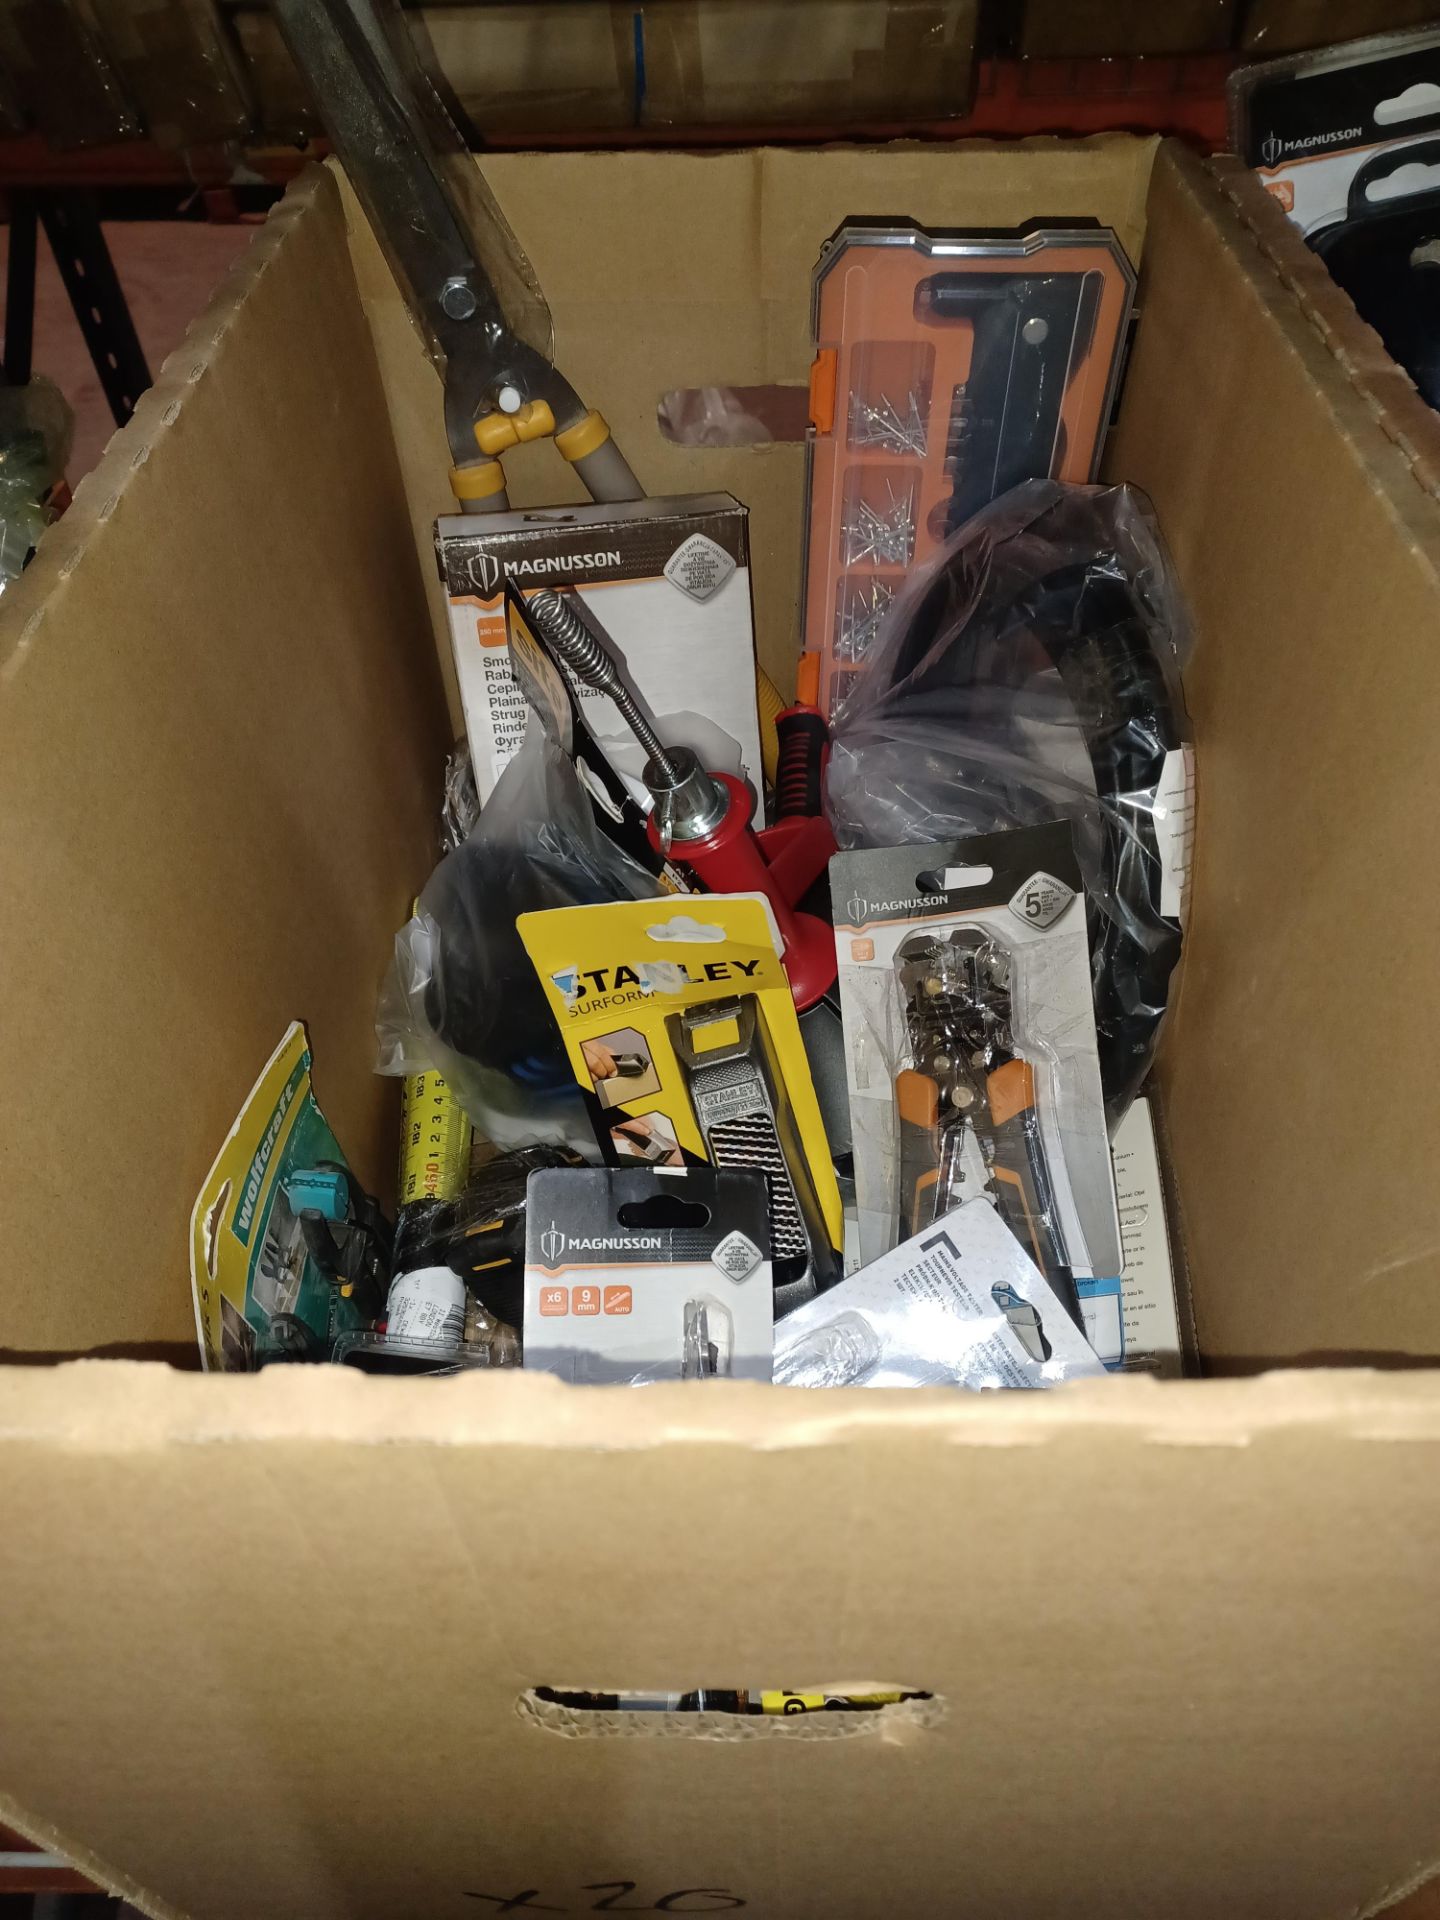 20 x Mixed Lot to include Magnusson Tools, Shears, Piveter Nail Gun and much more. - R13a.10